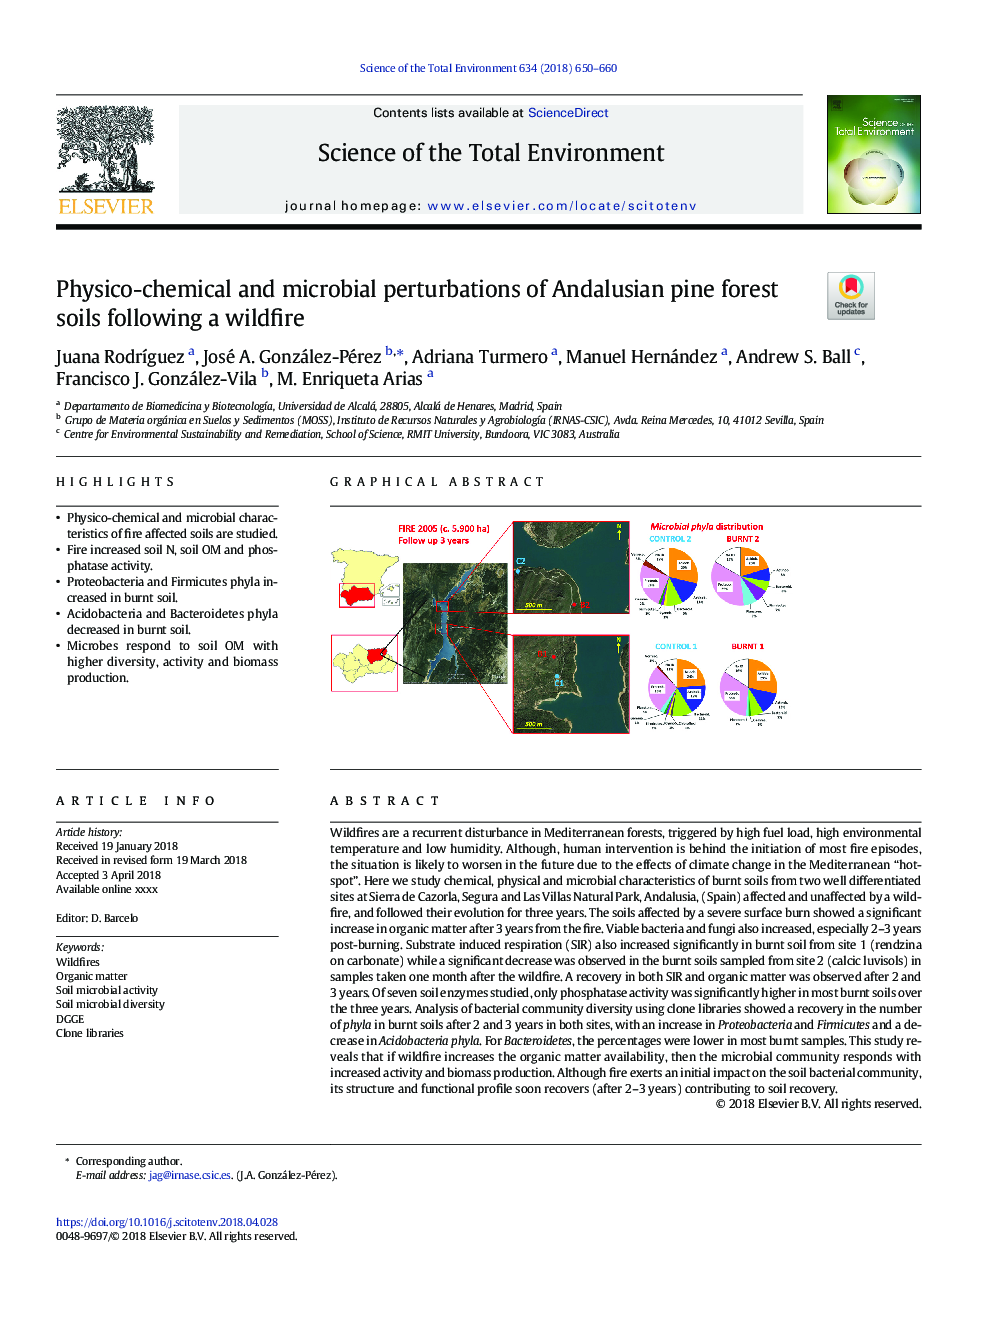 Physico-chemical and microbial perturbations of Andalusian pine forest soils following a wildfire